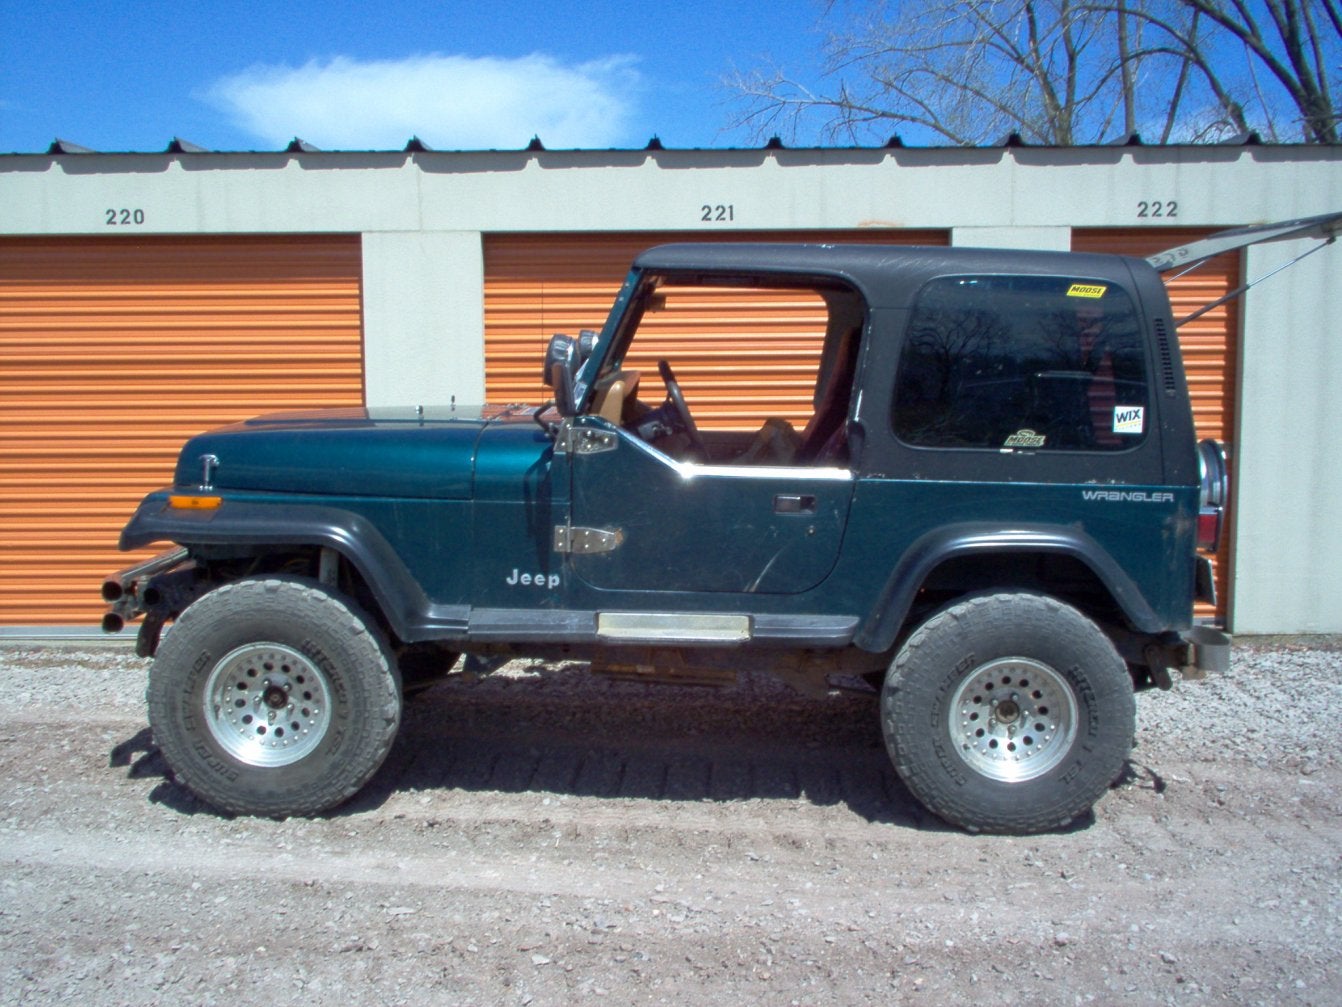 1995 Wrangler Speedometer not working | Jeep Enthusiast Forums